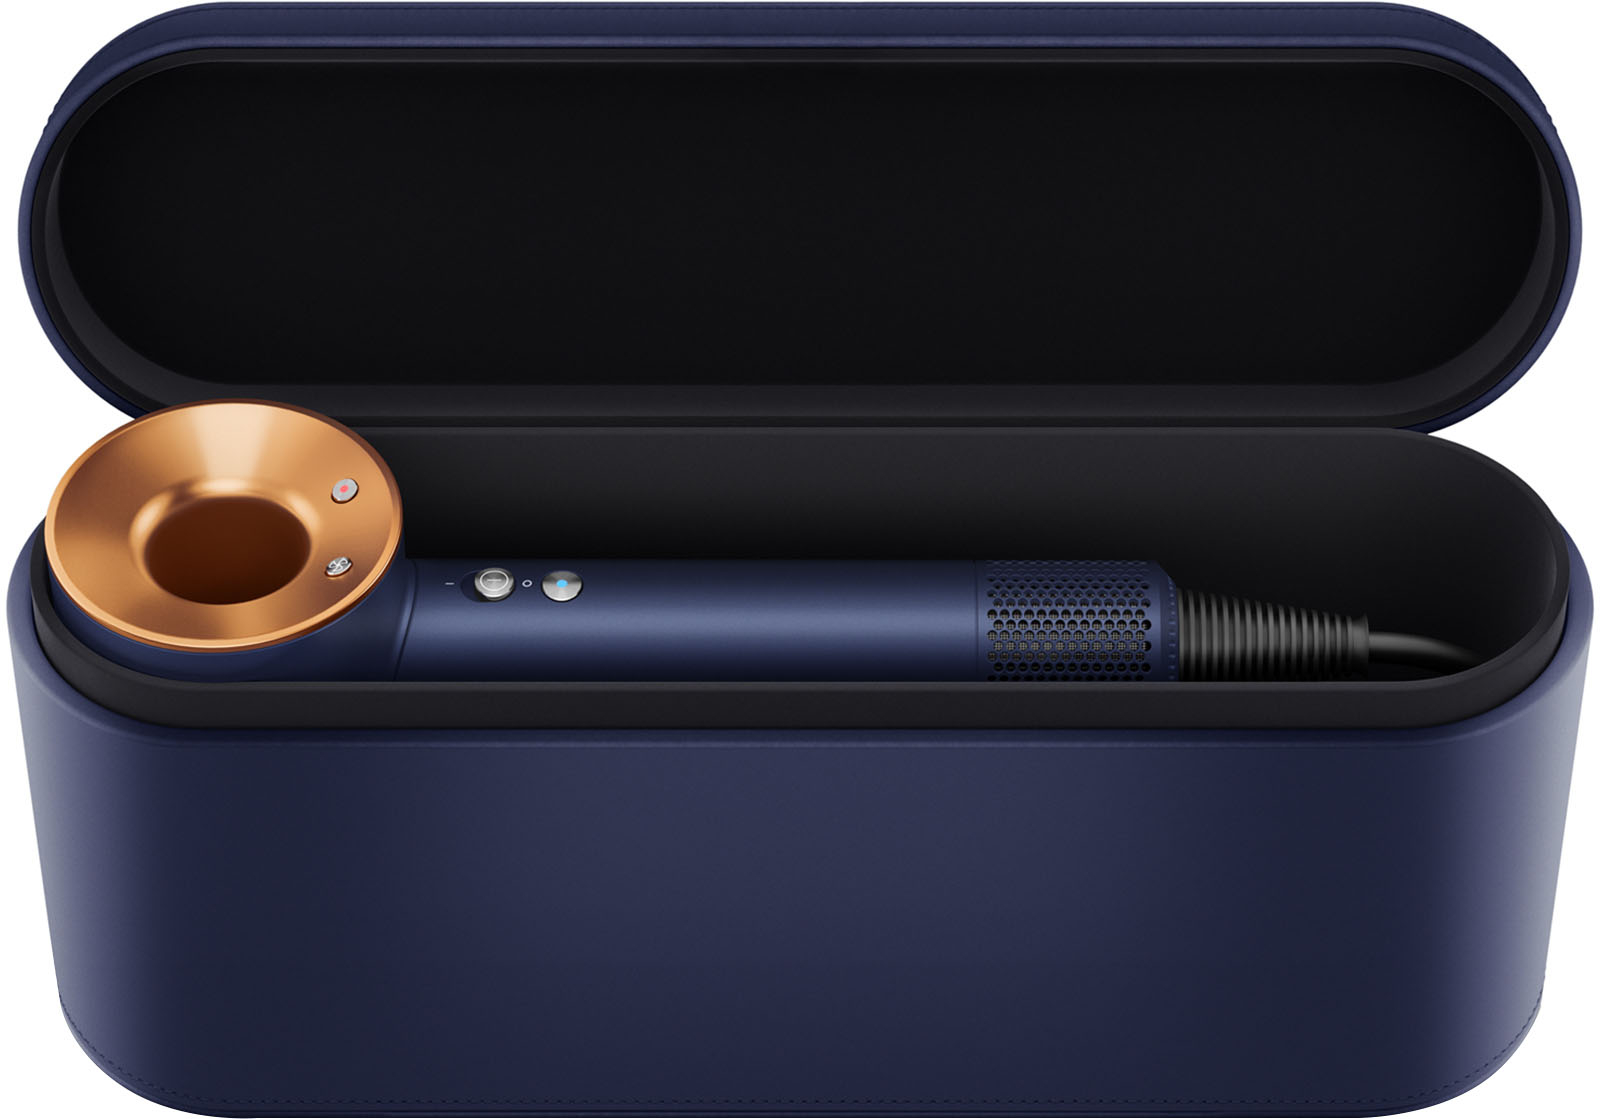 Angle View: New special edition Dyson Supersonic hair dryer - Prussian blue/rich copper